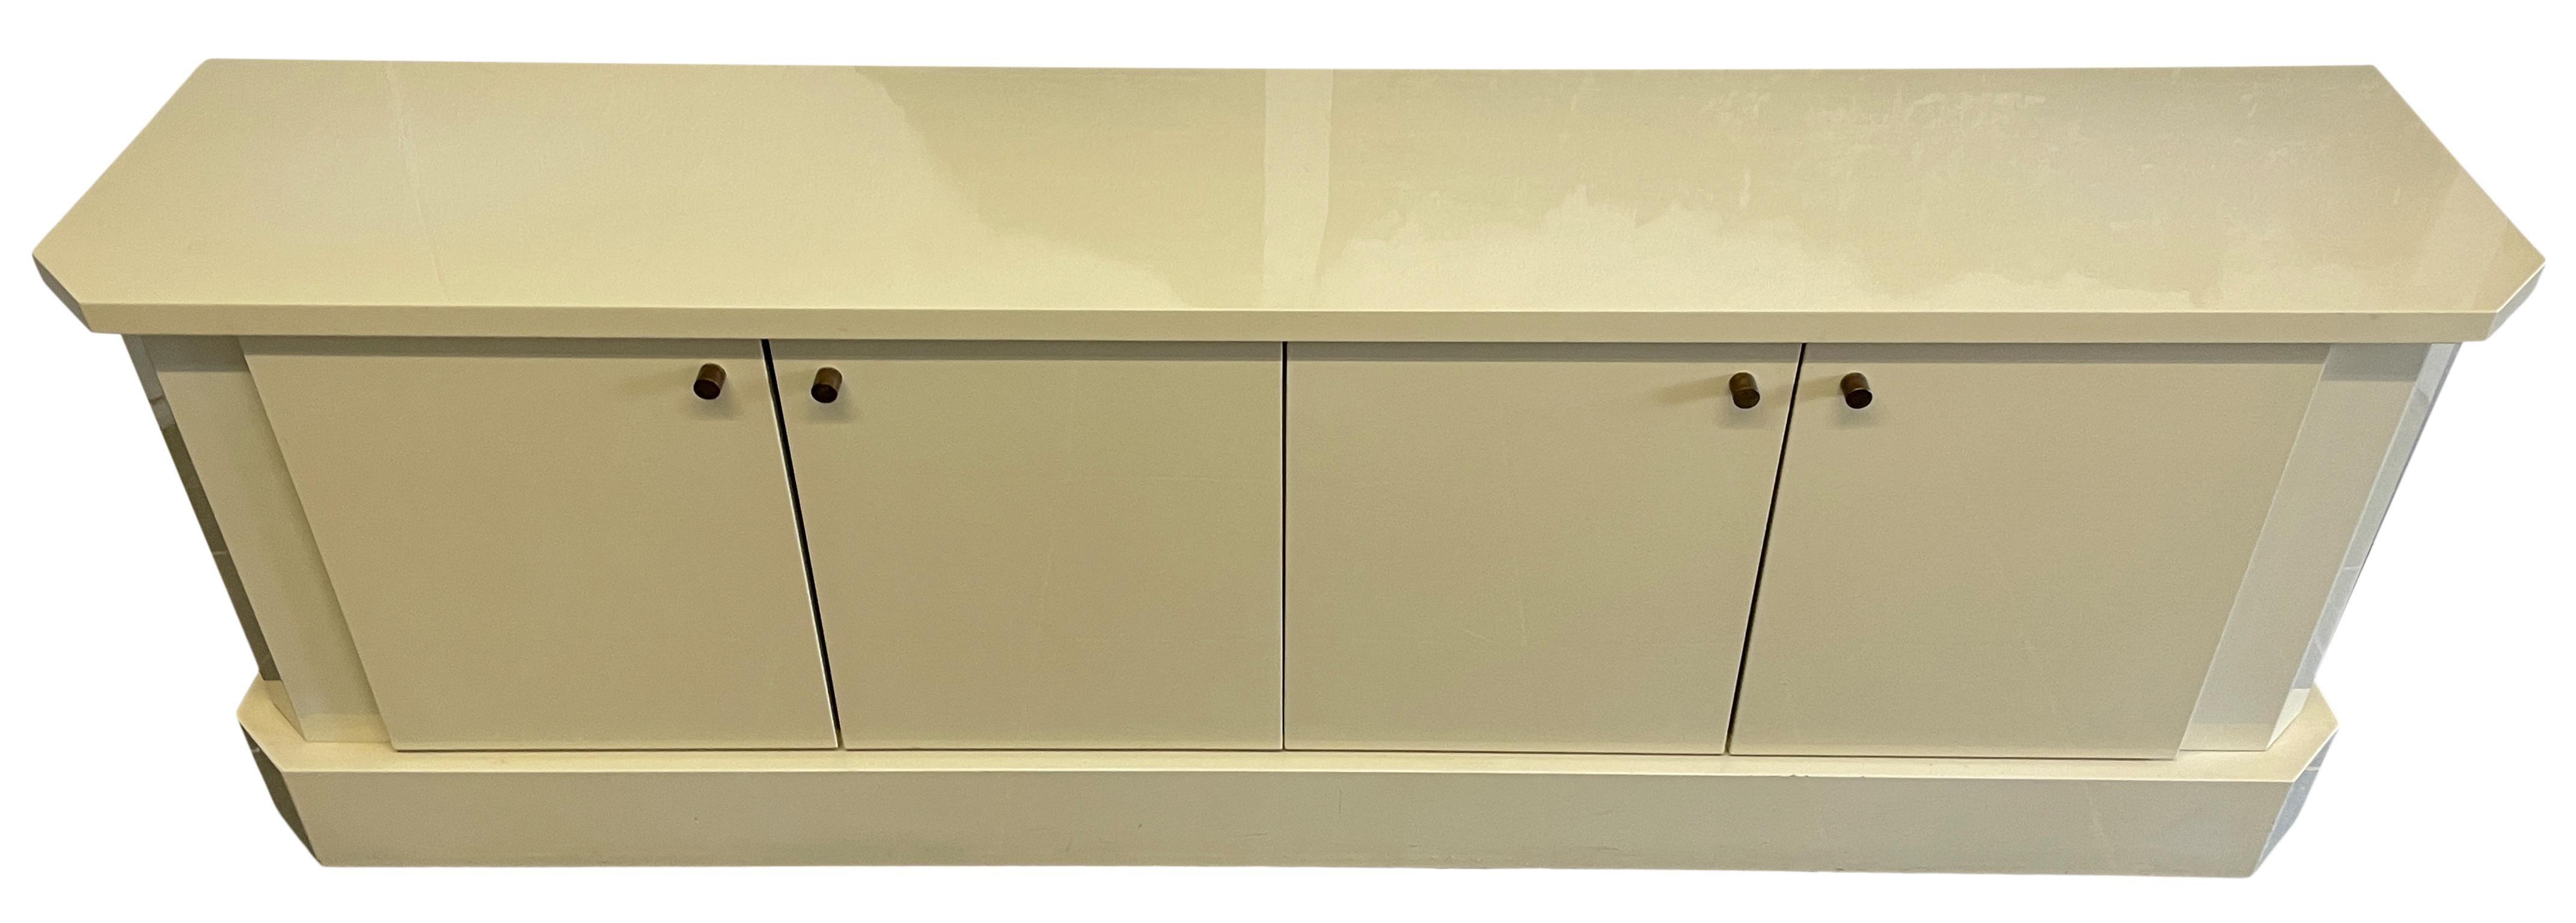 Stunning credenza by Jean Claude Mahey. Has 4 front doors with brass pulls Ivory lacquer finish. High Quality built credenza with 4 cabinet doors with solid brand cylindrical knobs. Interior is white oak wood with adjustable shelves. Very clean